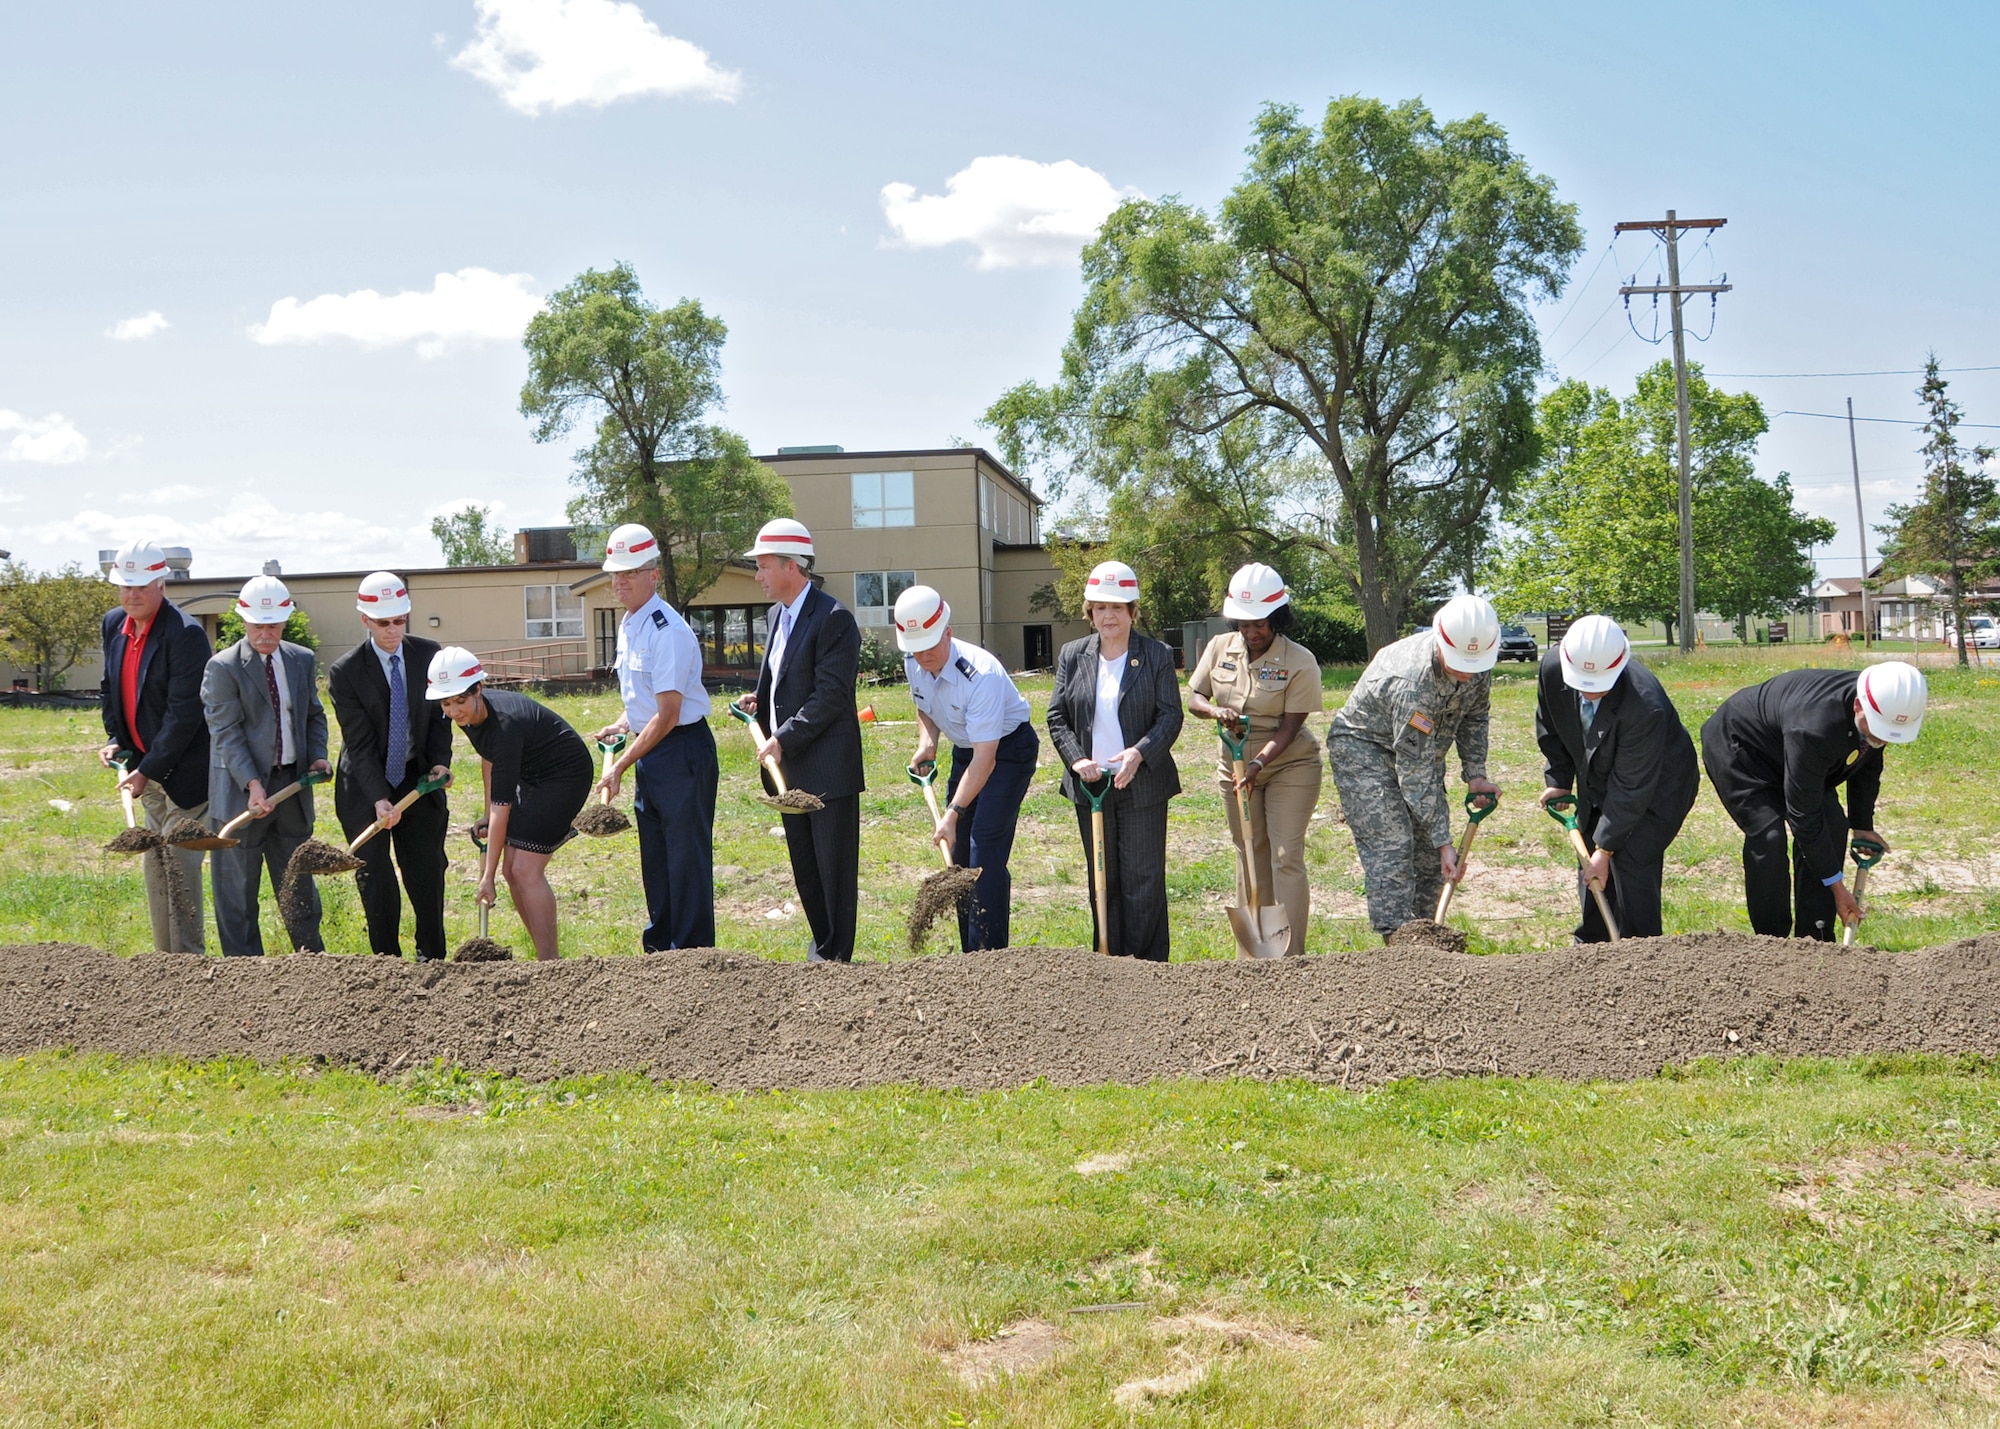 Western New York Servicemembers and Public Figures break the ground at the CAC groundbreaking ceremony, June 21, 2010, Niagara Falls Air Reserve Station, Niagara Falls, NY.  At the conclusion of the groundbreaking ceremony refreshments provided by NIMAC were prepared and served by the 914th Services Squadron. (U.S. Air Force photo by Staff Sgt. Joseph McKee